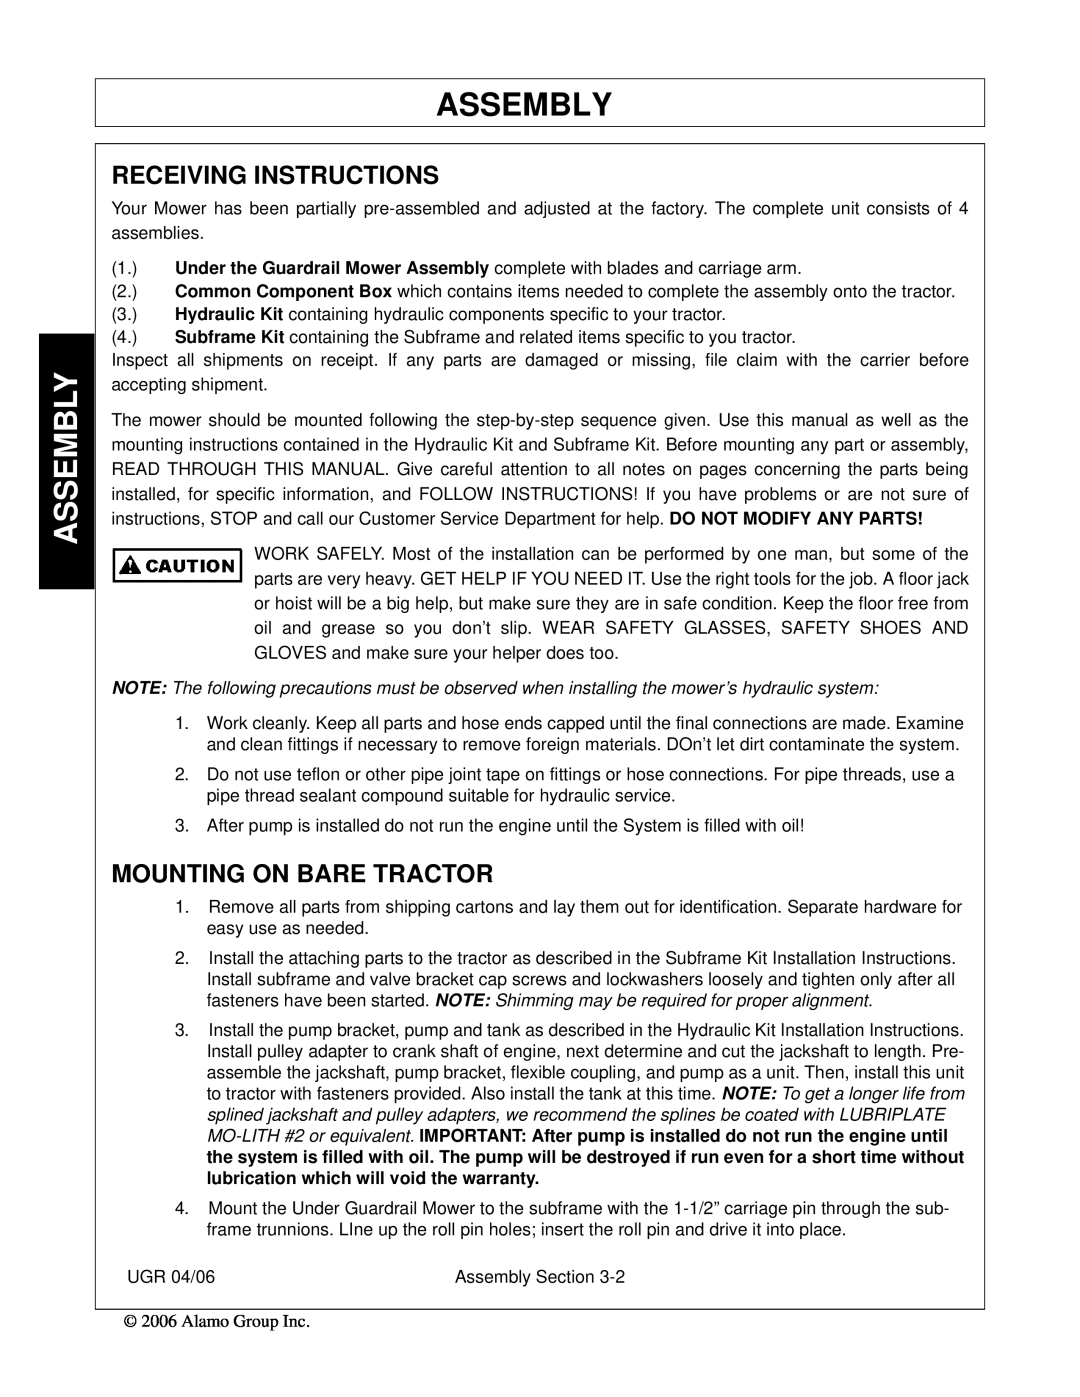 Alamo 02979718C manual Assembly, Receiving Instructions, Mounting On Bare Tractor 